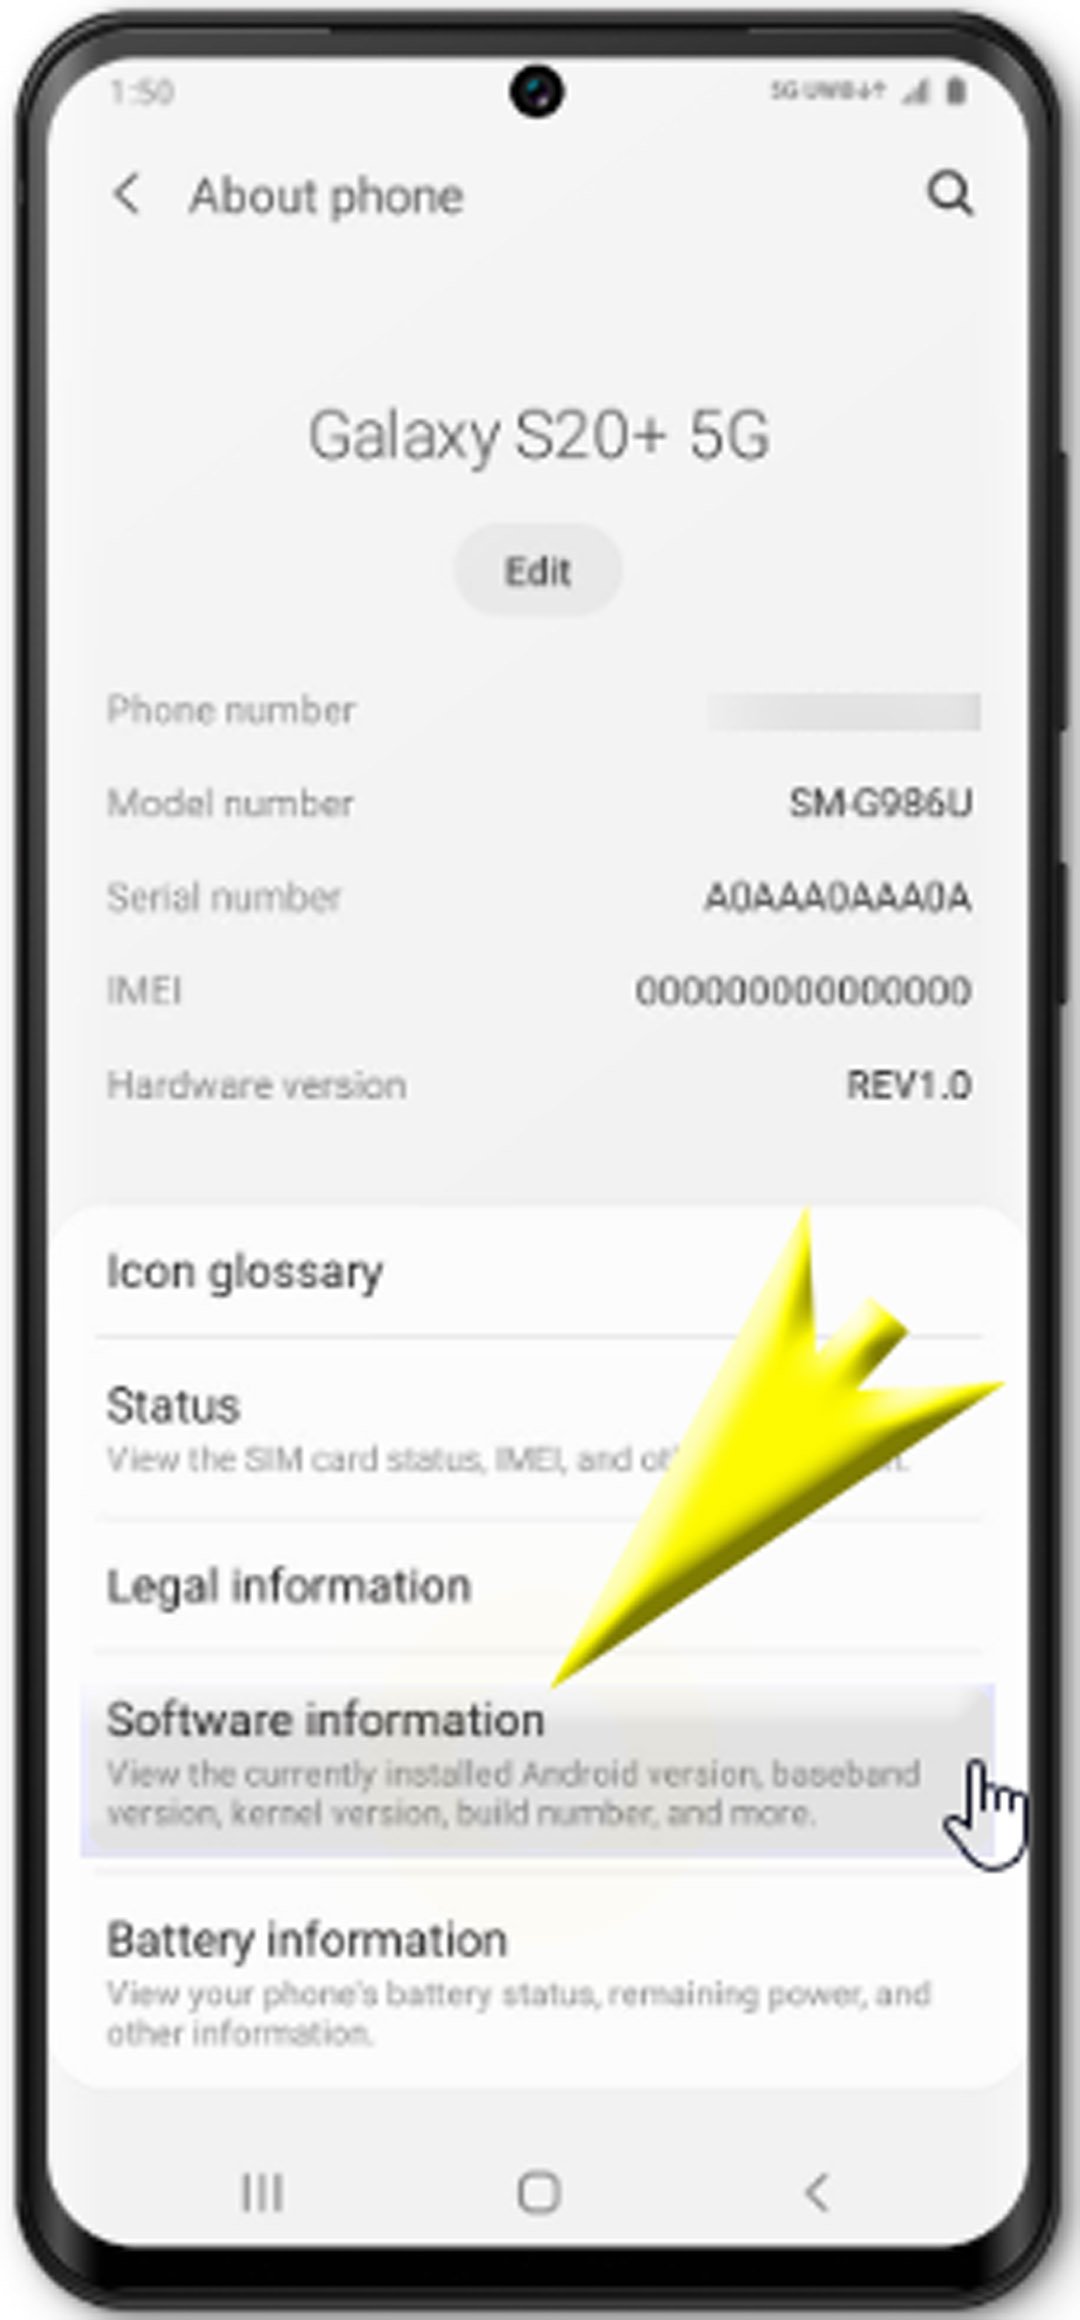 enable usb debugging on galaxy s20 - software information